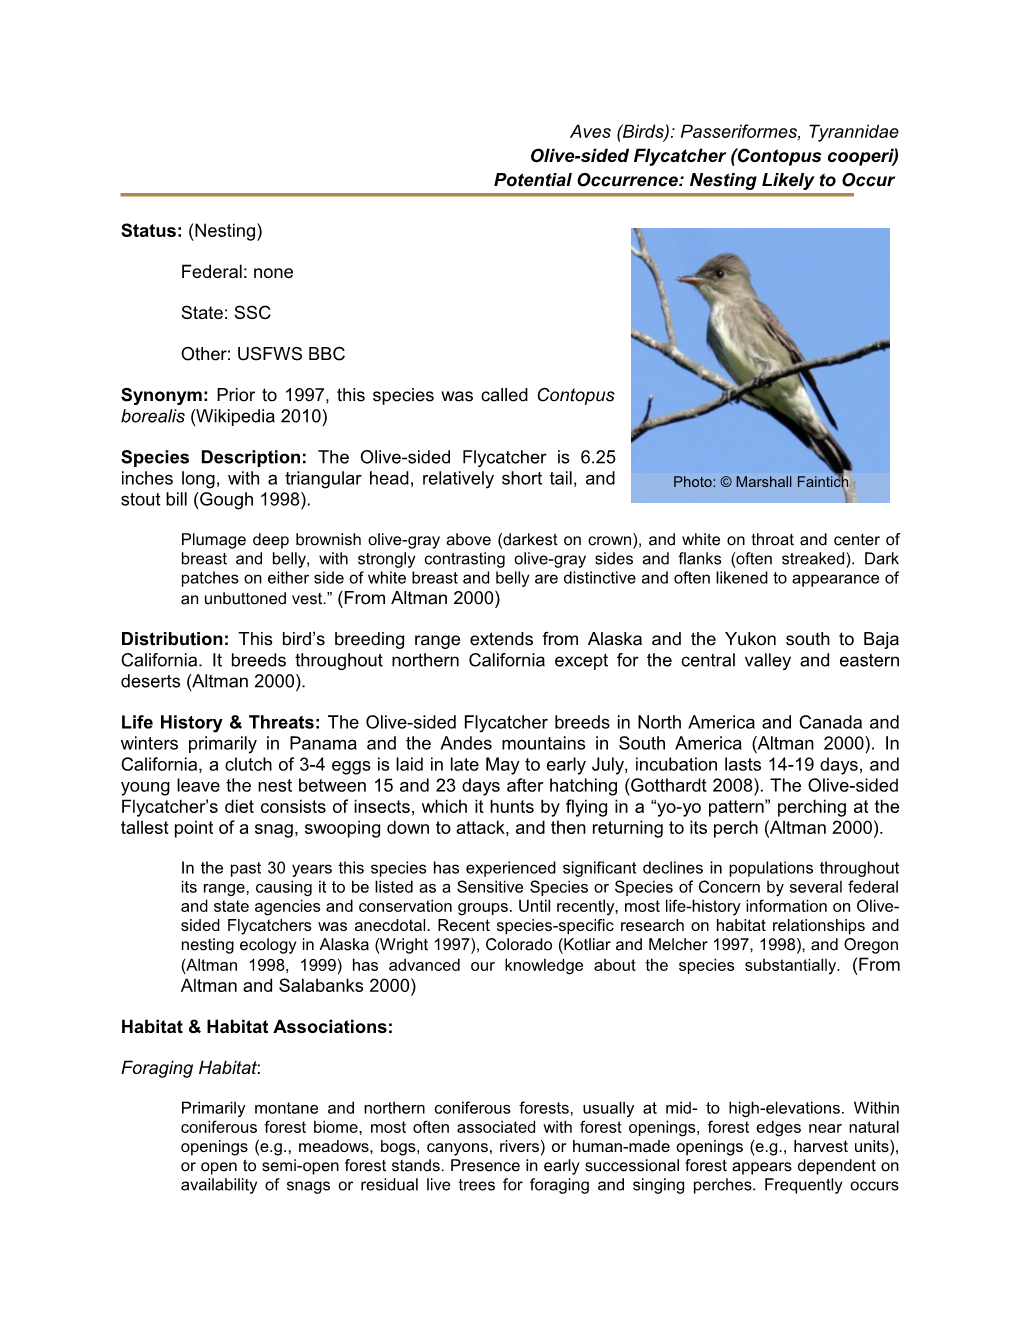 Olive-Sided Flycatcher (Contopus Cooperi)